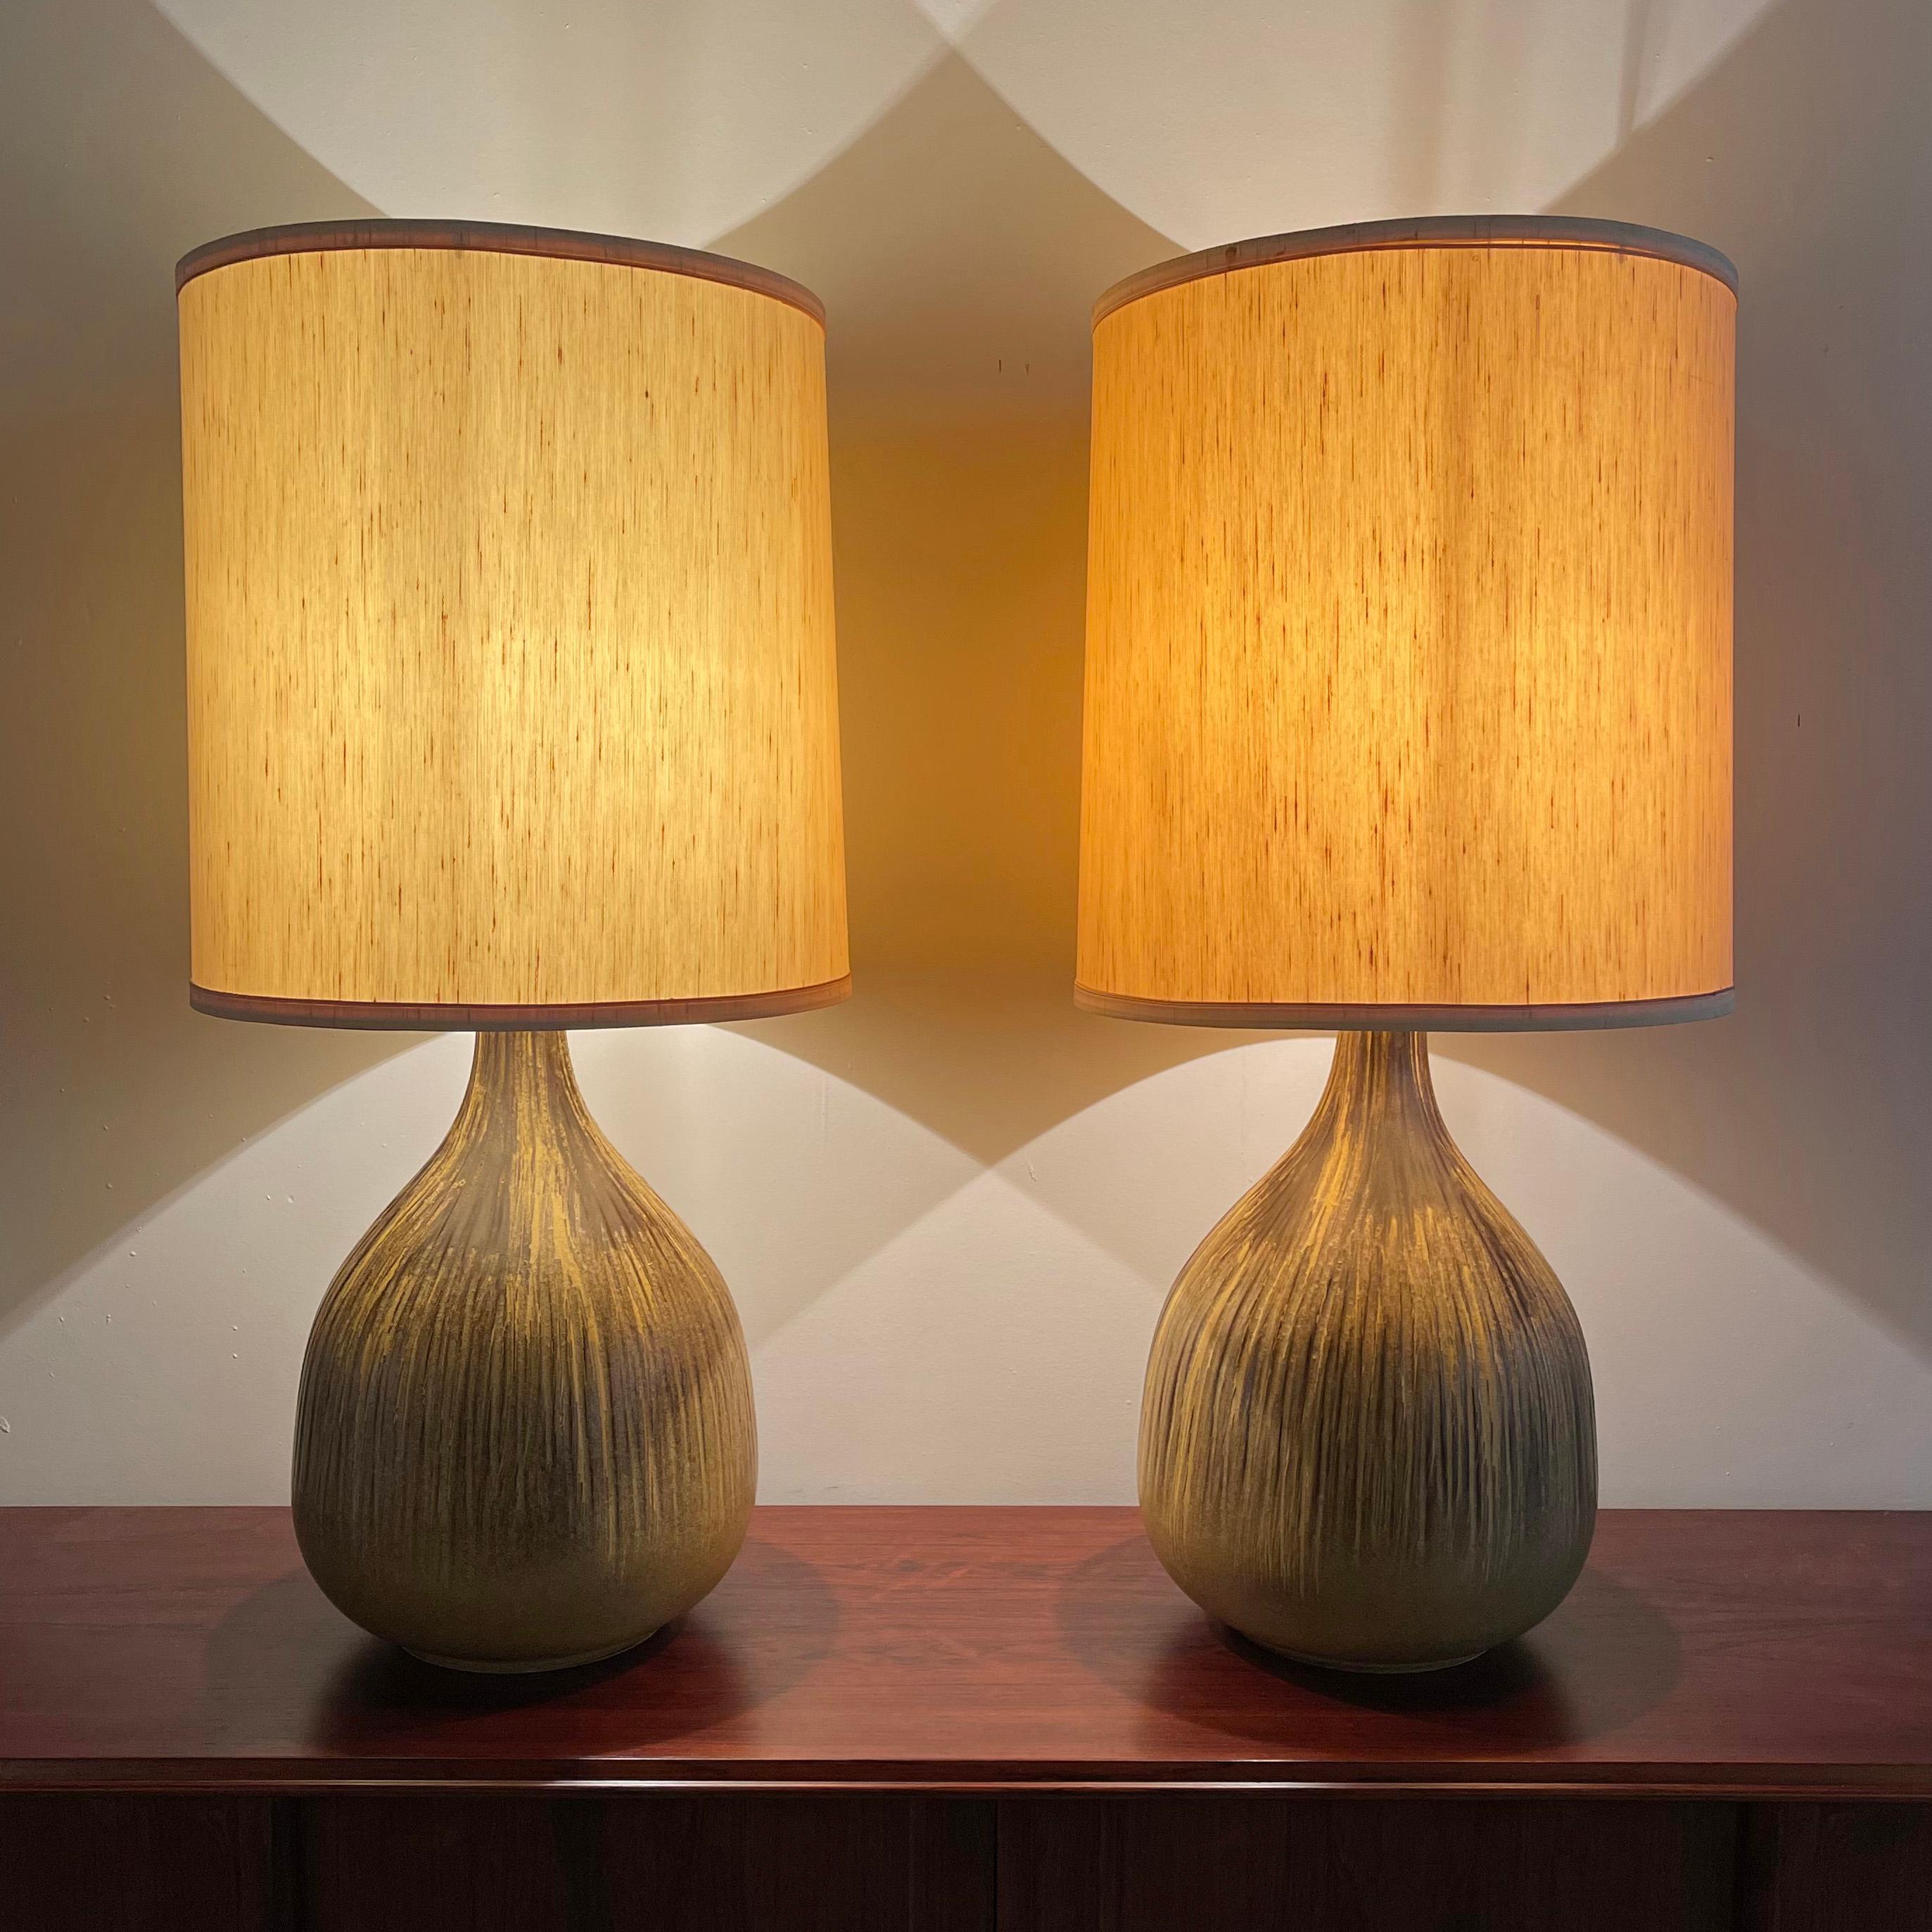 American Mid-Century Modern Art Pottery Gourd Table Lamps